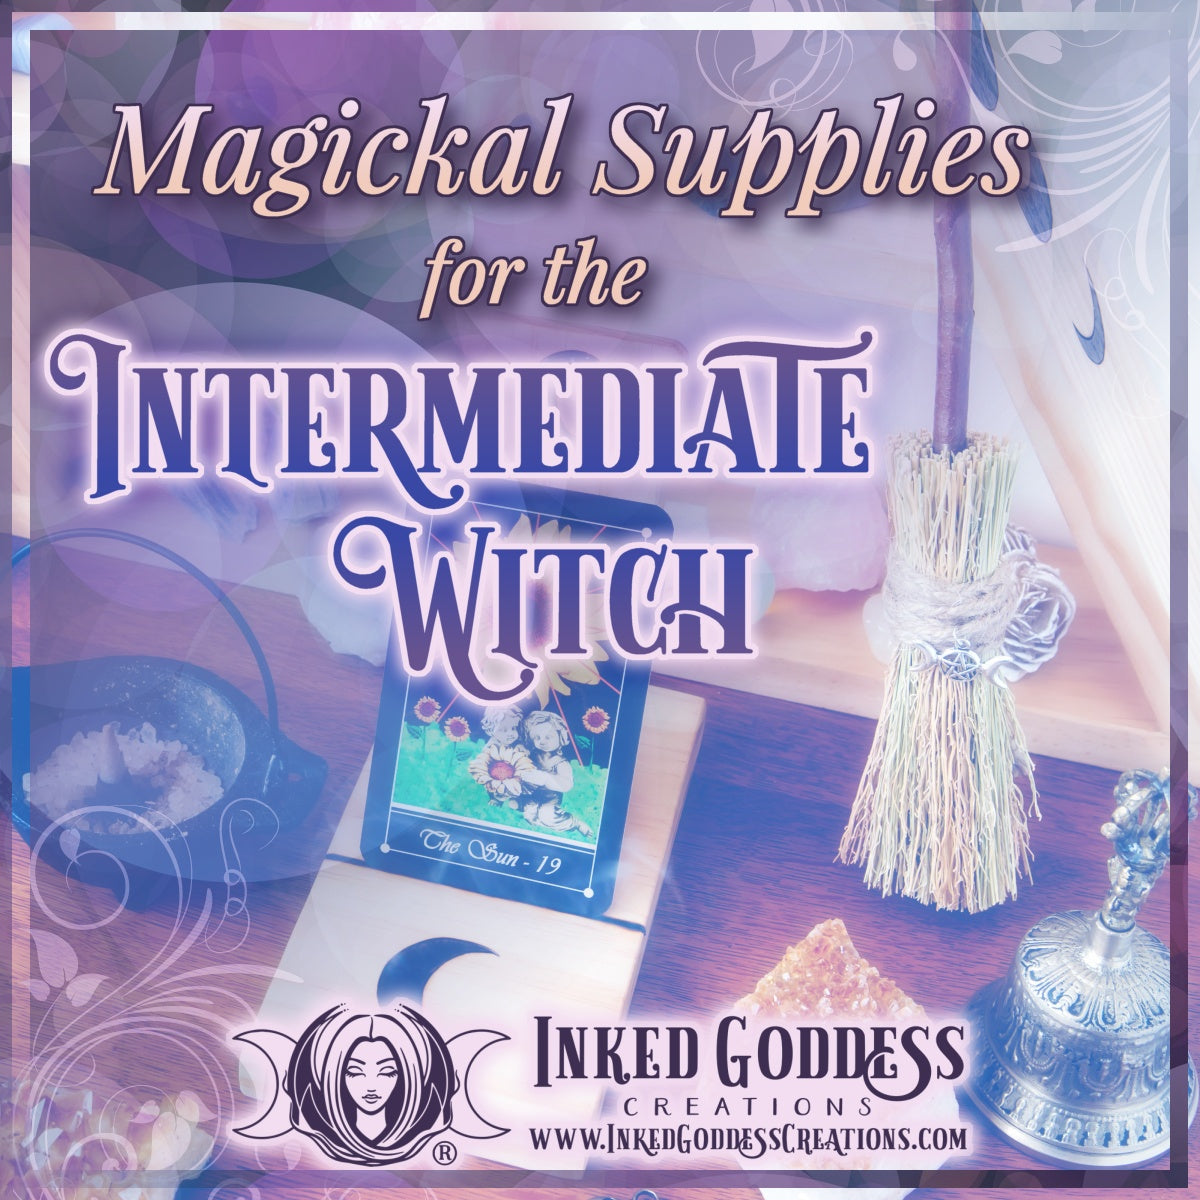 Magickal Supplies for the Intermediate Witch